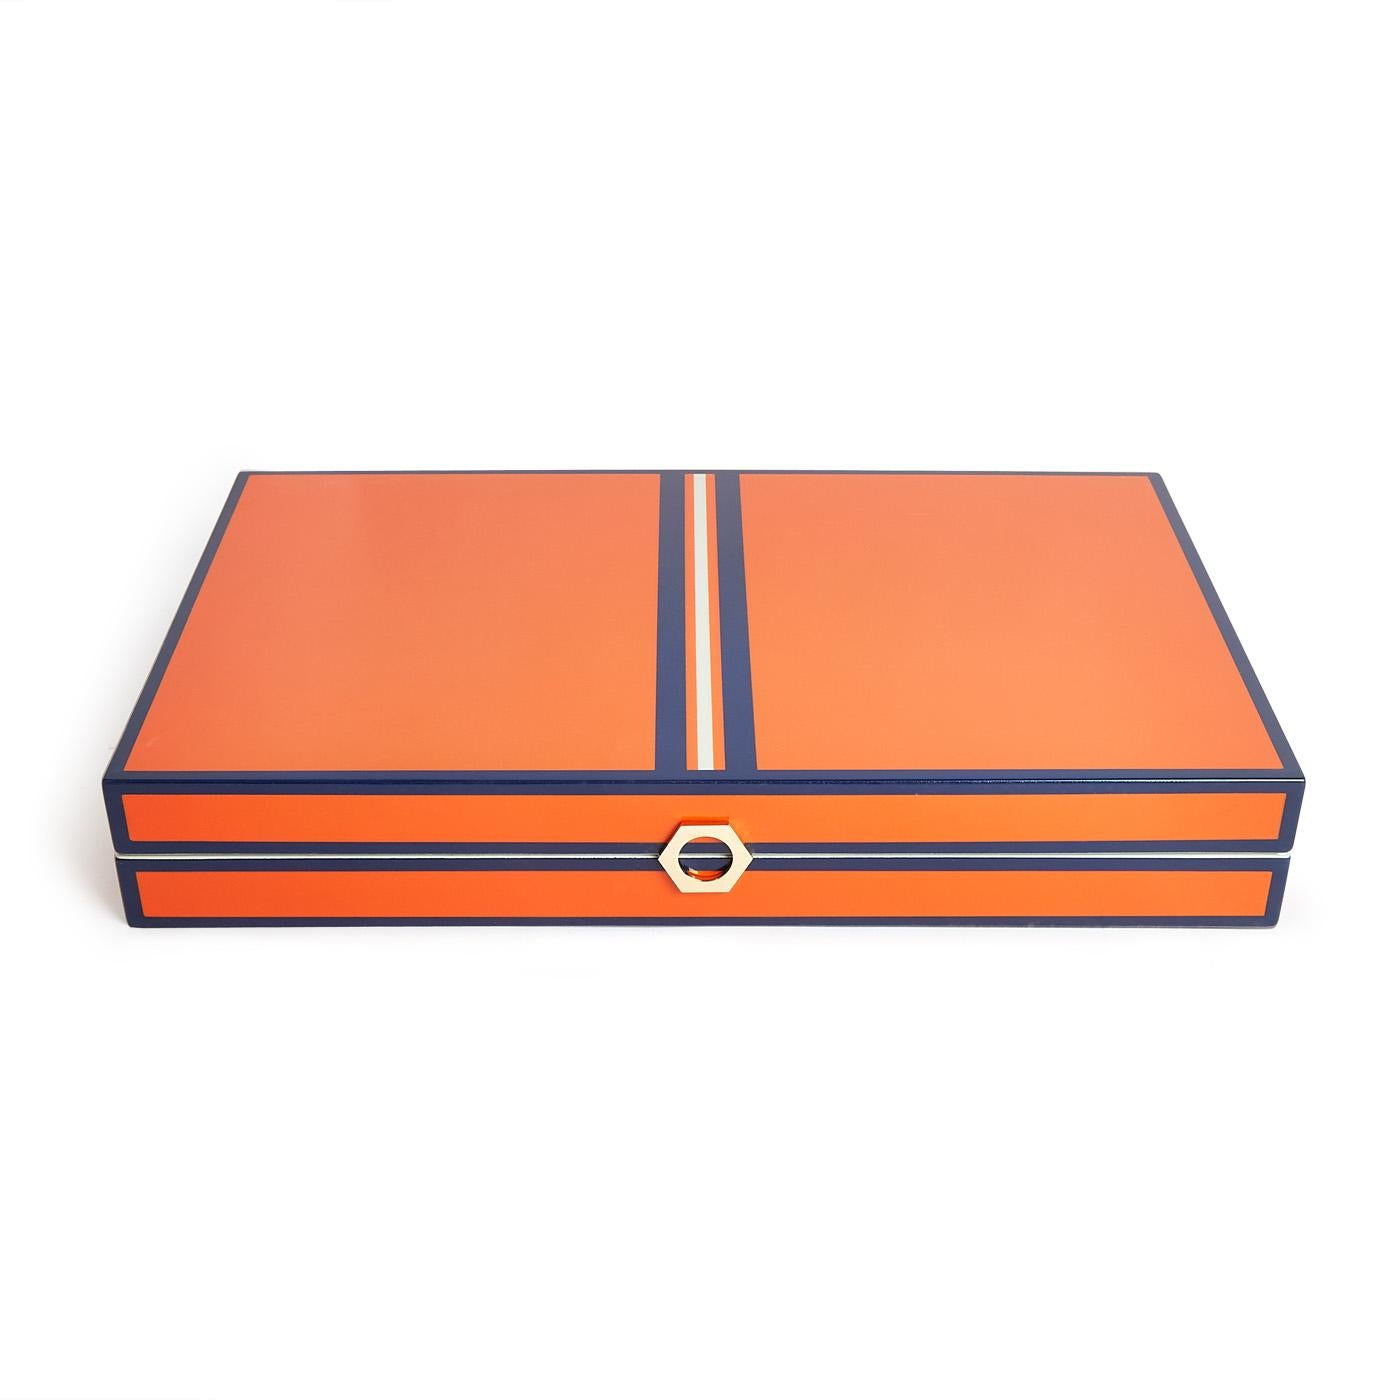 Raise your game. Our lacquer backgammon set is a fabulous combination of function and groovy design. You'd be mad to hide this bright and shiny sizzler, but if you want to, it folds into a chic lacquer box. Looks great closed or open, and it's sure